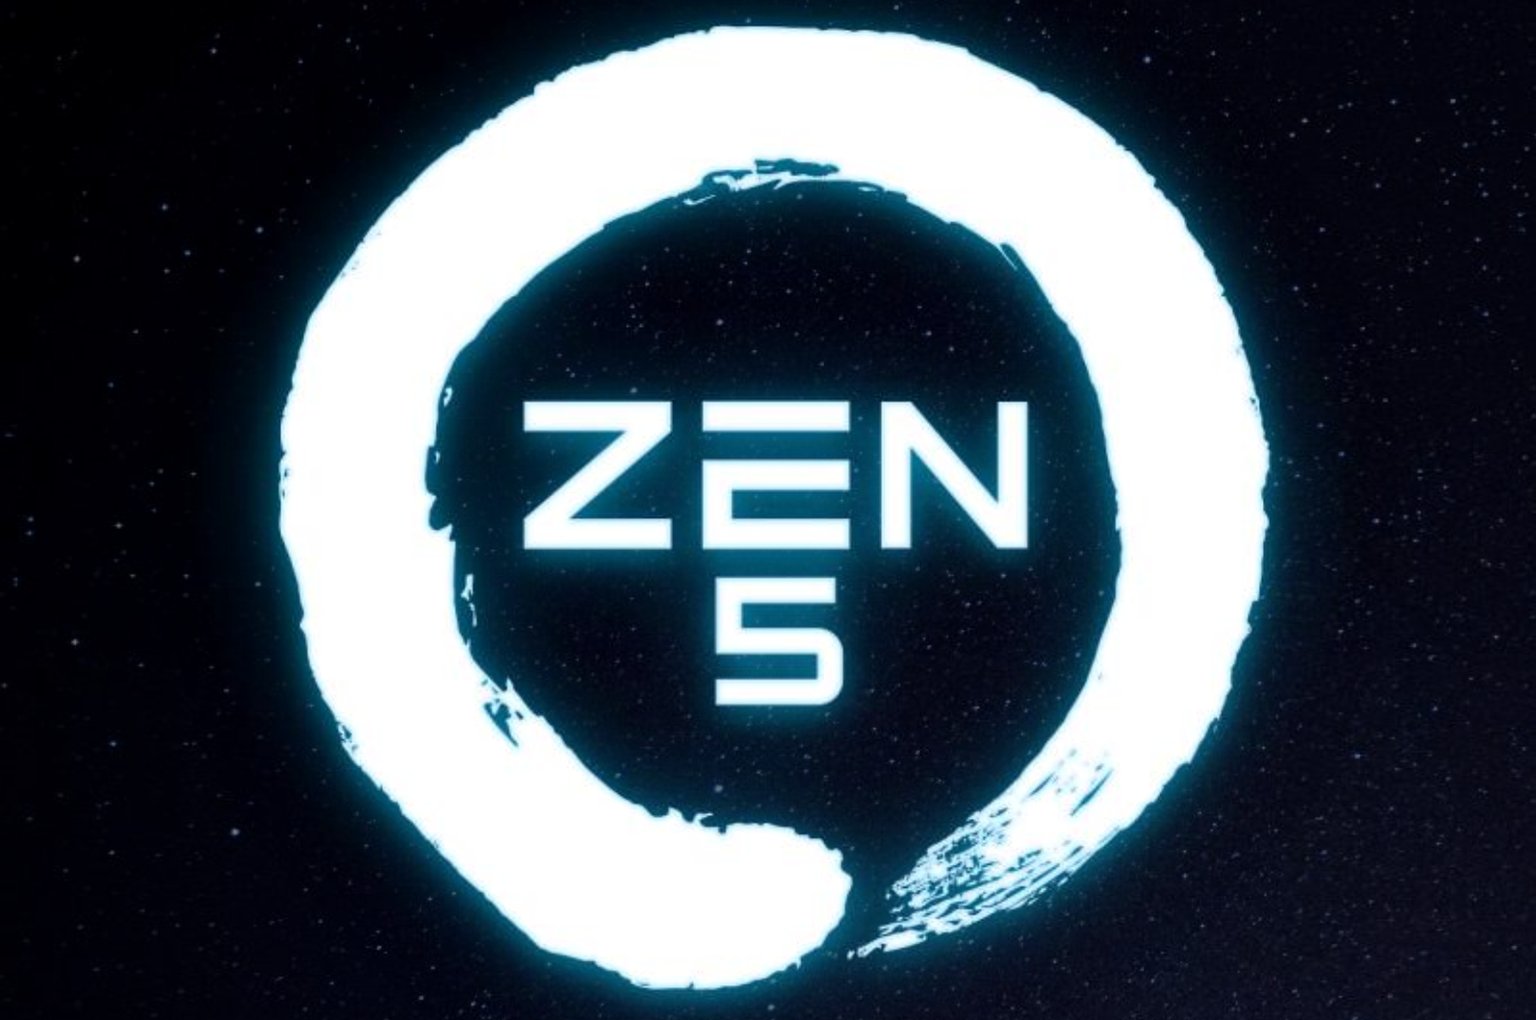 AMD&#8217;s Zen 5 Ryzen CPUs are on track for launch this year &#8211; OC3D